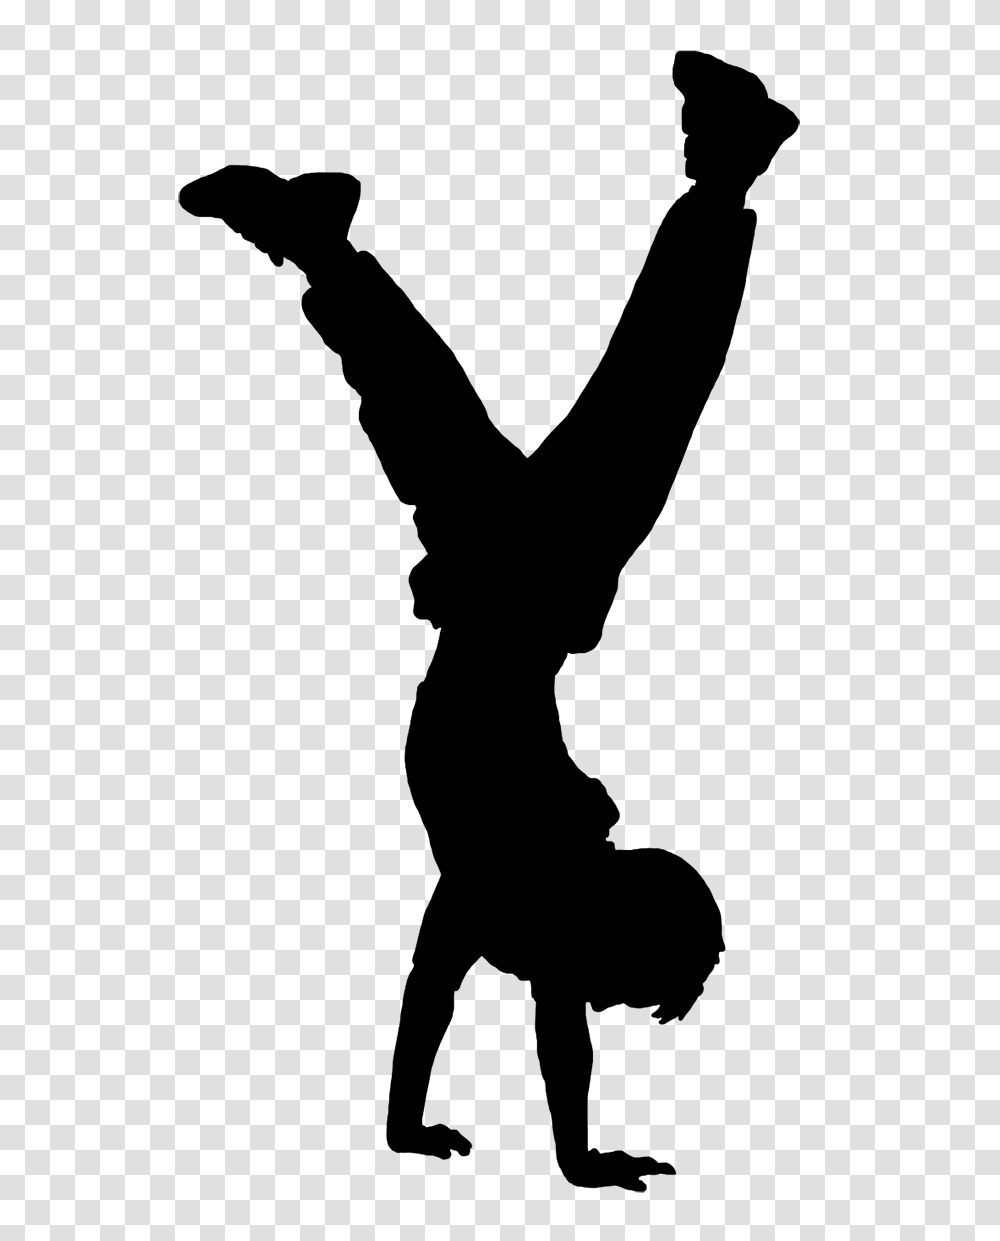 Silhouette Of Boy Doing Handstand Silhouettes Silhouette, Phone, Electronics, Mobile Phone, Cell Phone Transparent Png